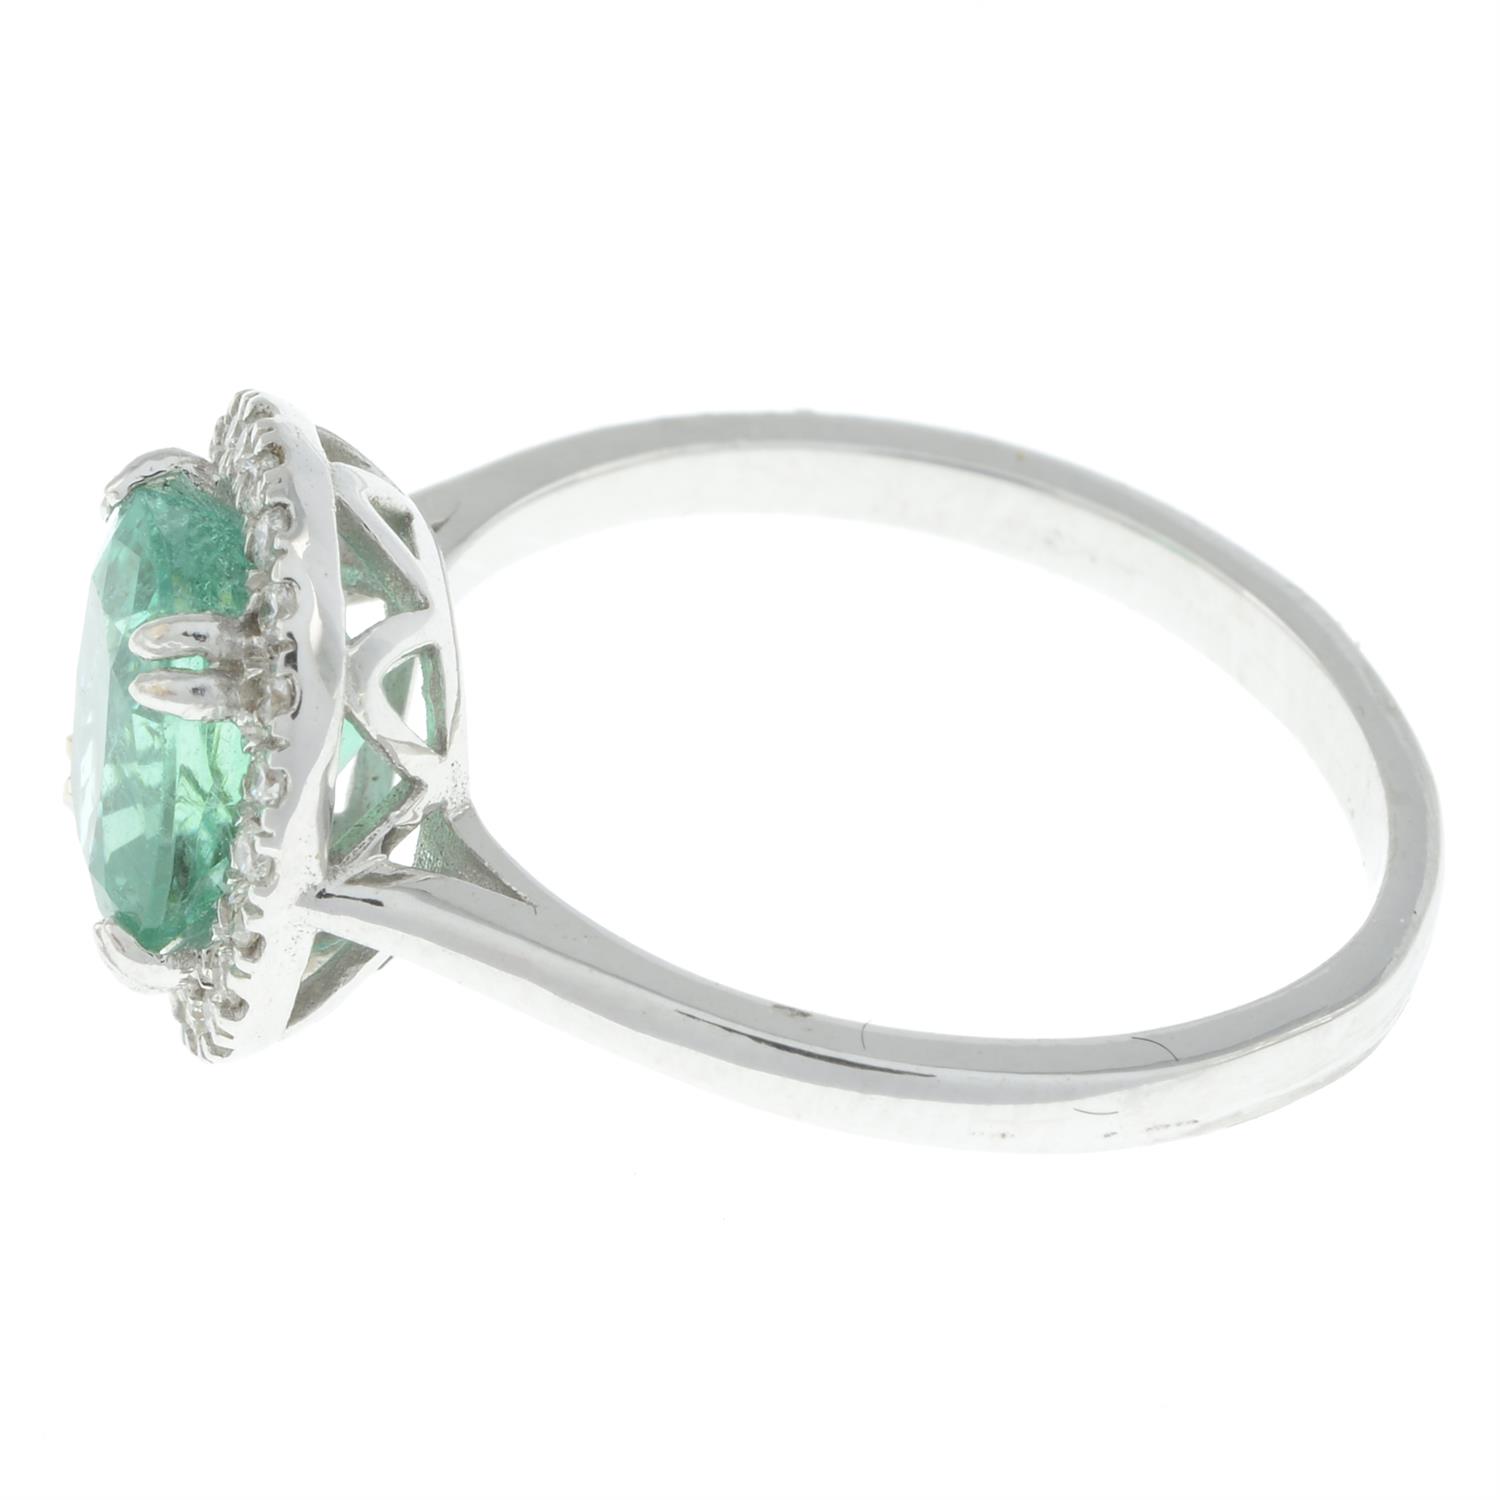 Emerald and diamond cluster ring - Image 4 of 5